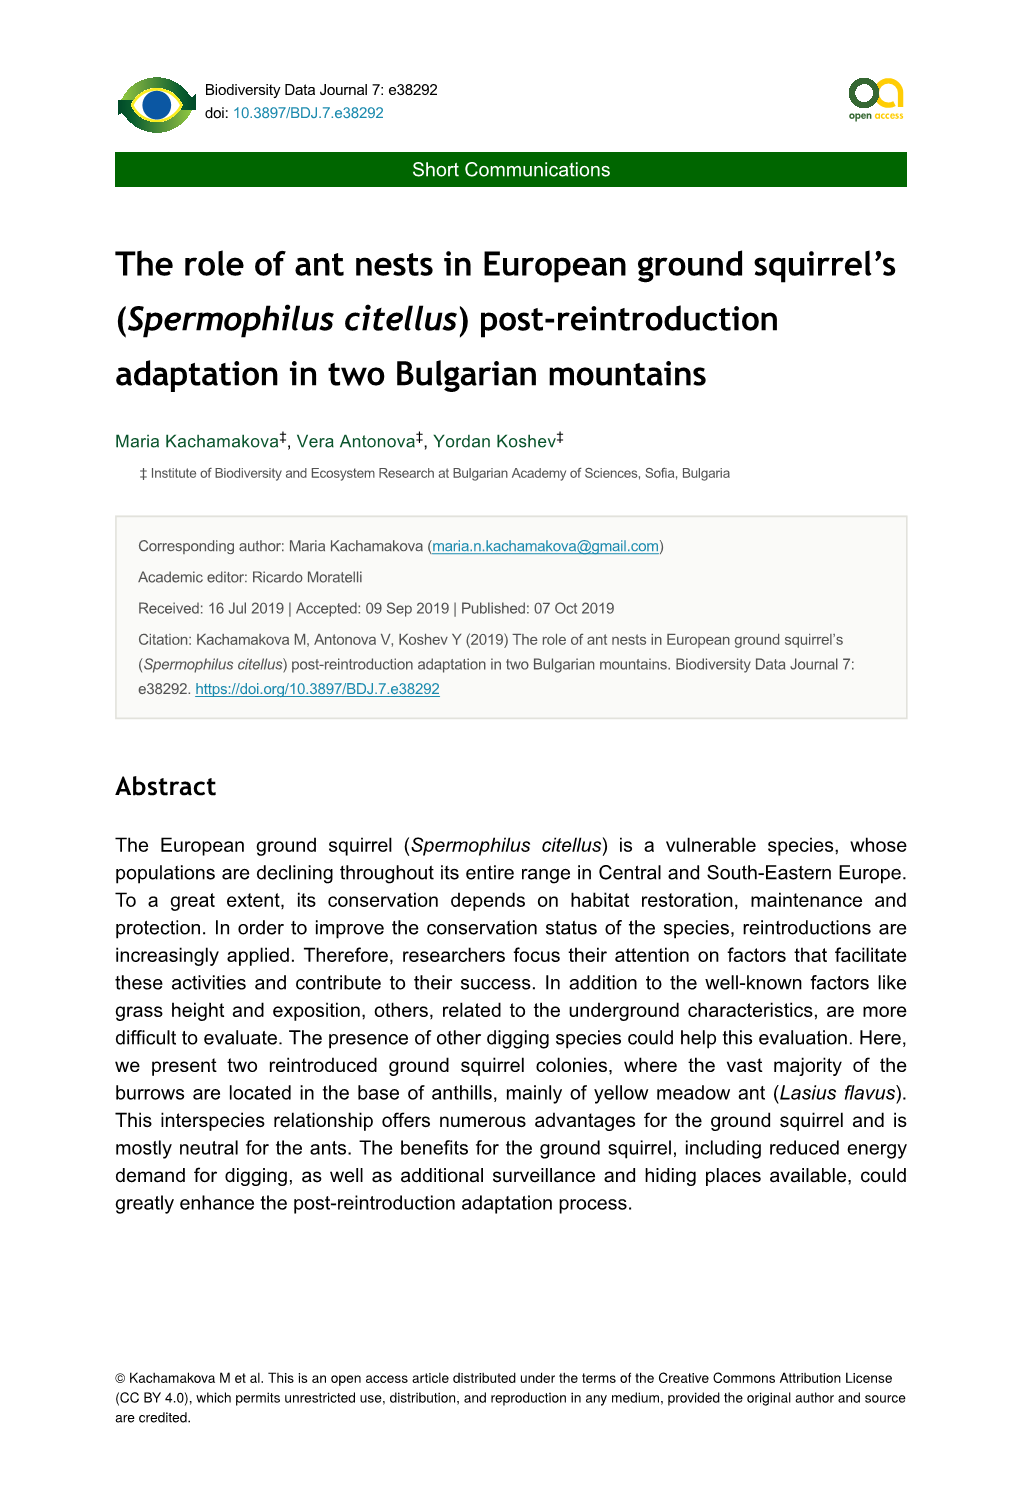 The Role of Ant Nests in European Ground Squirrel's (Spermophilus